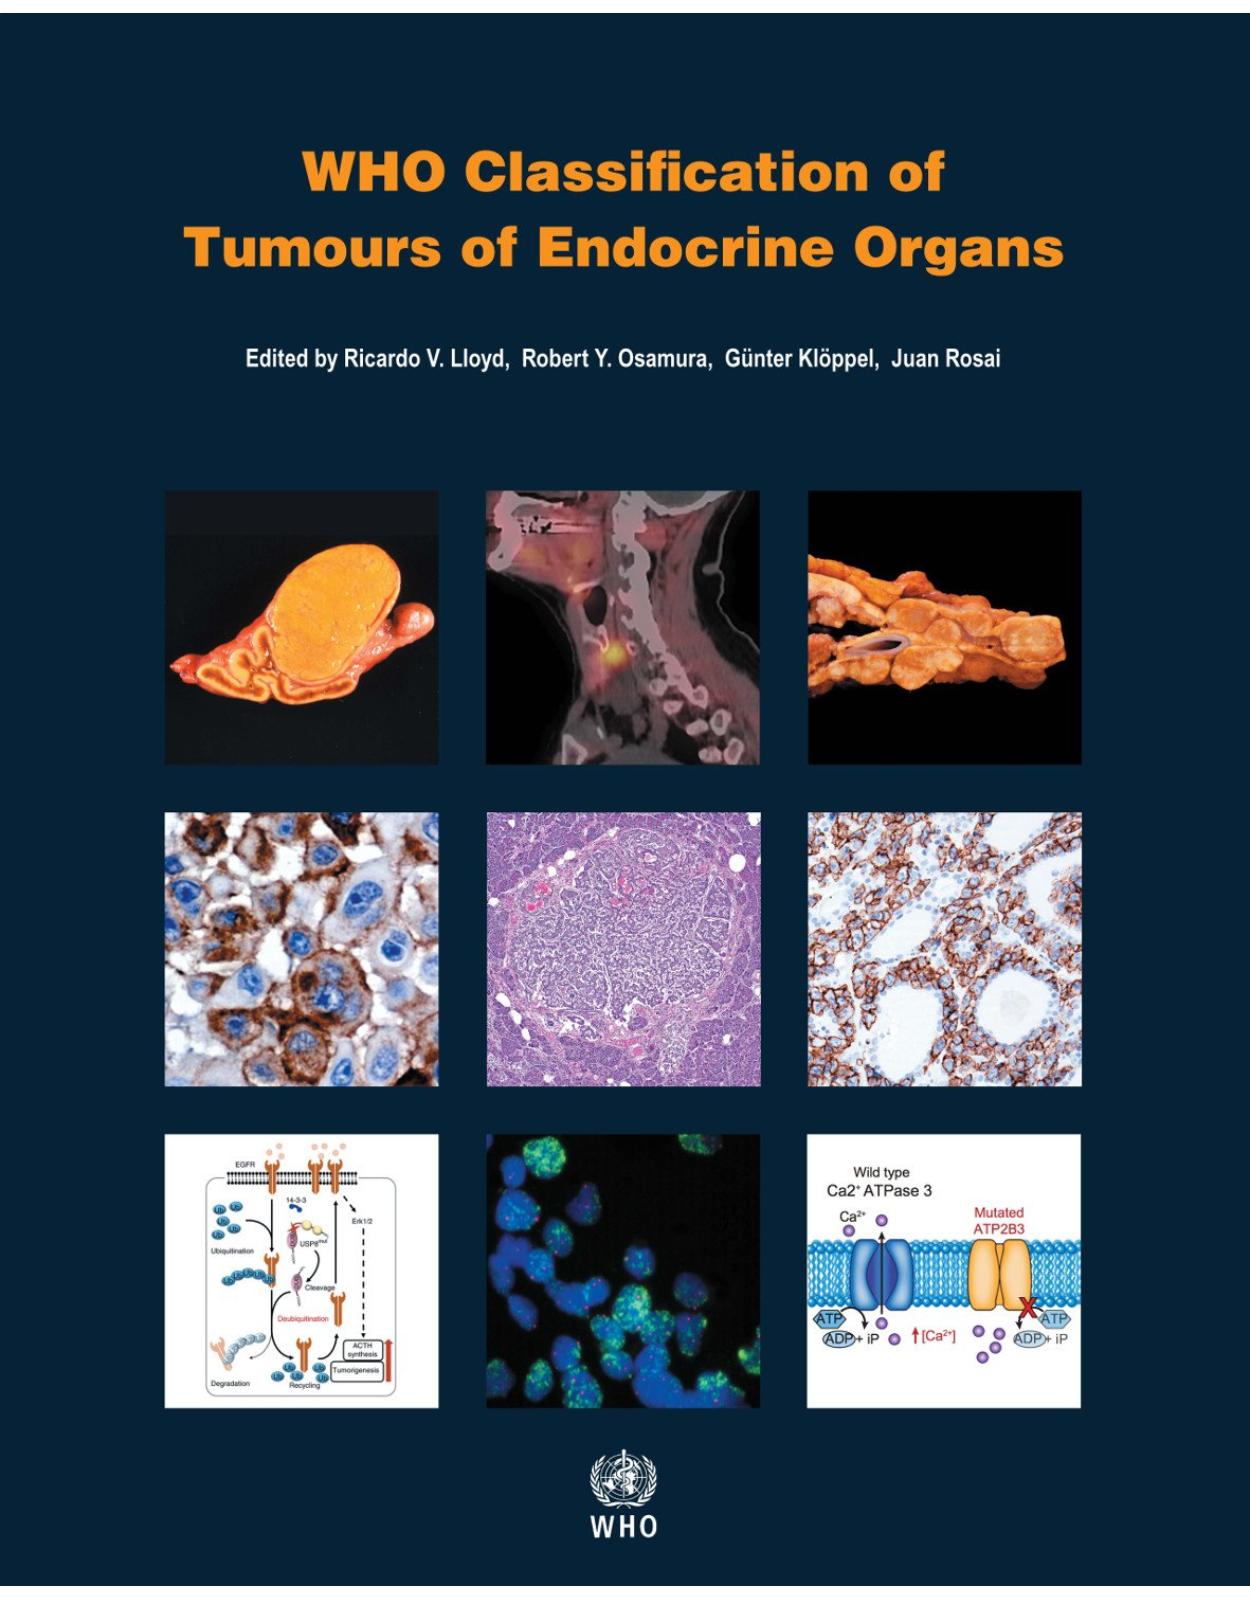 WHO classification of tumours of endocrine organs (World Health Organization Classification of Tumours)